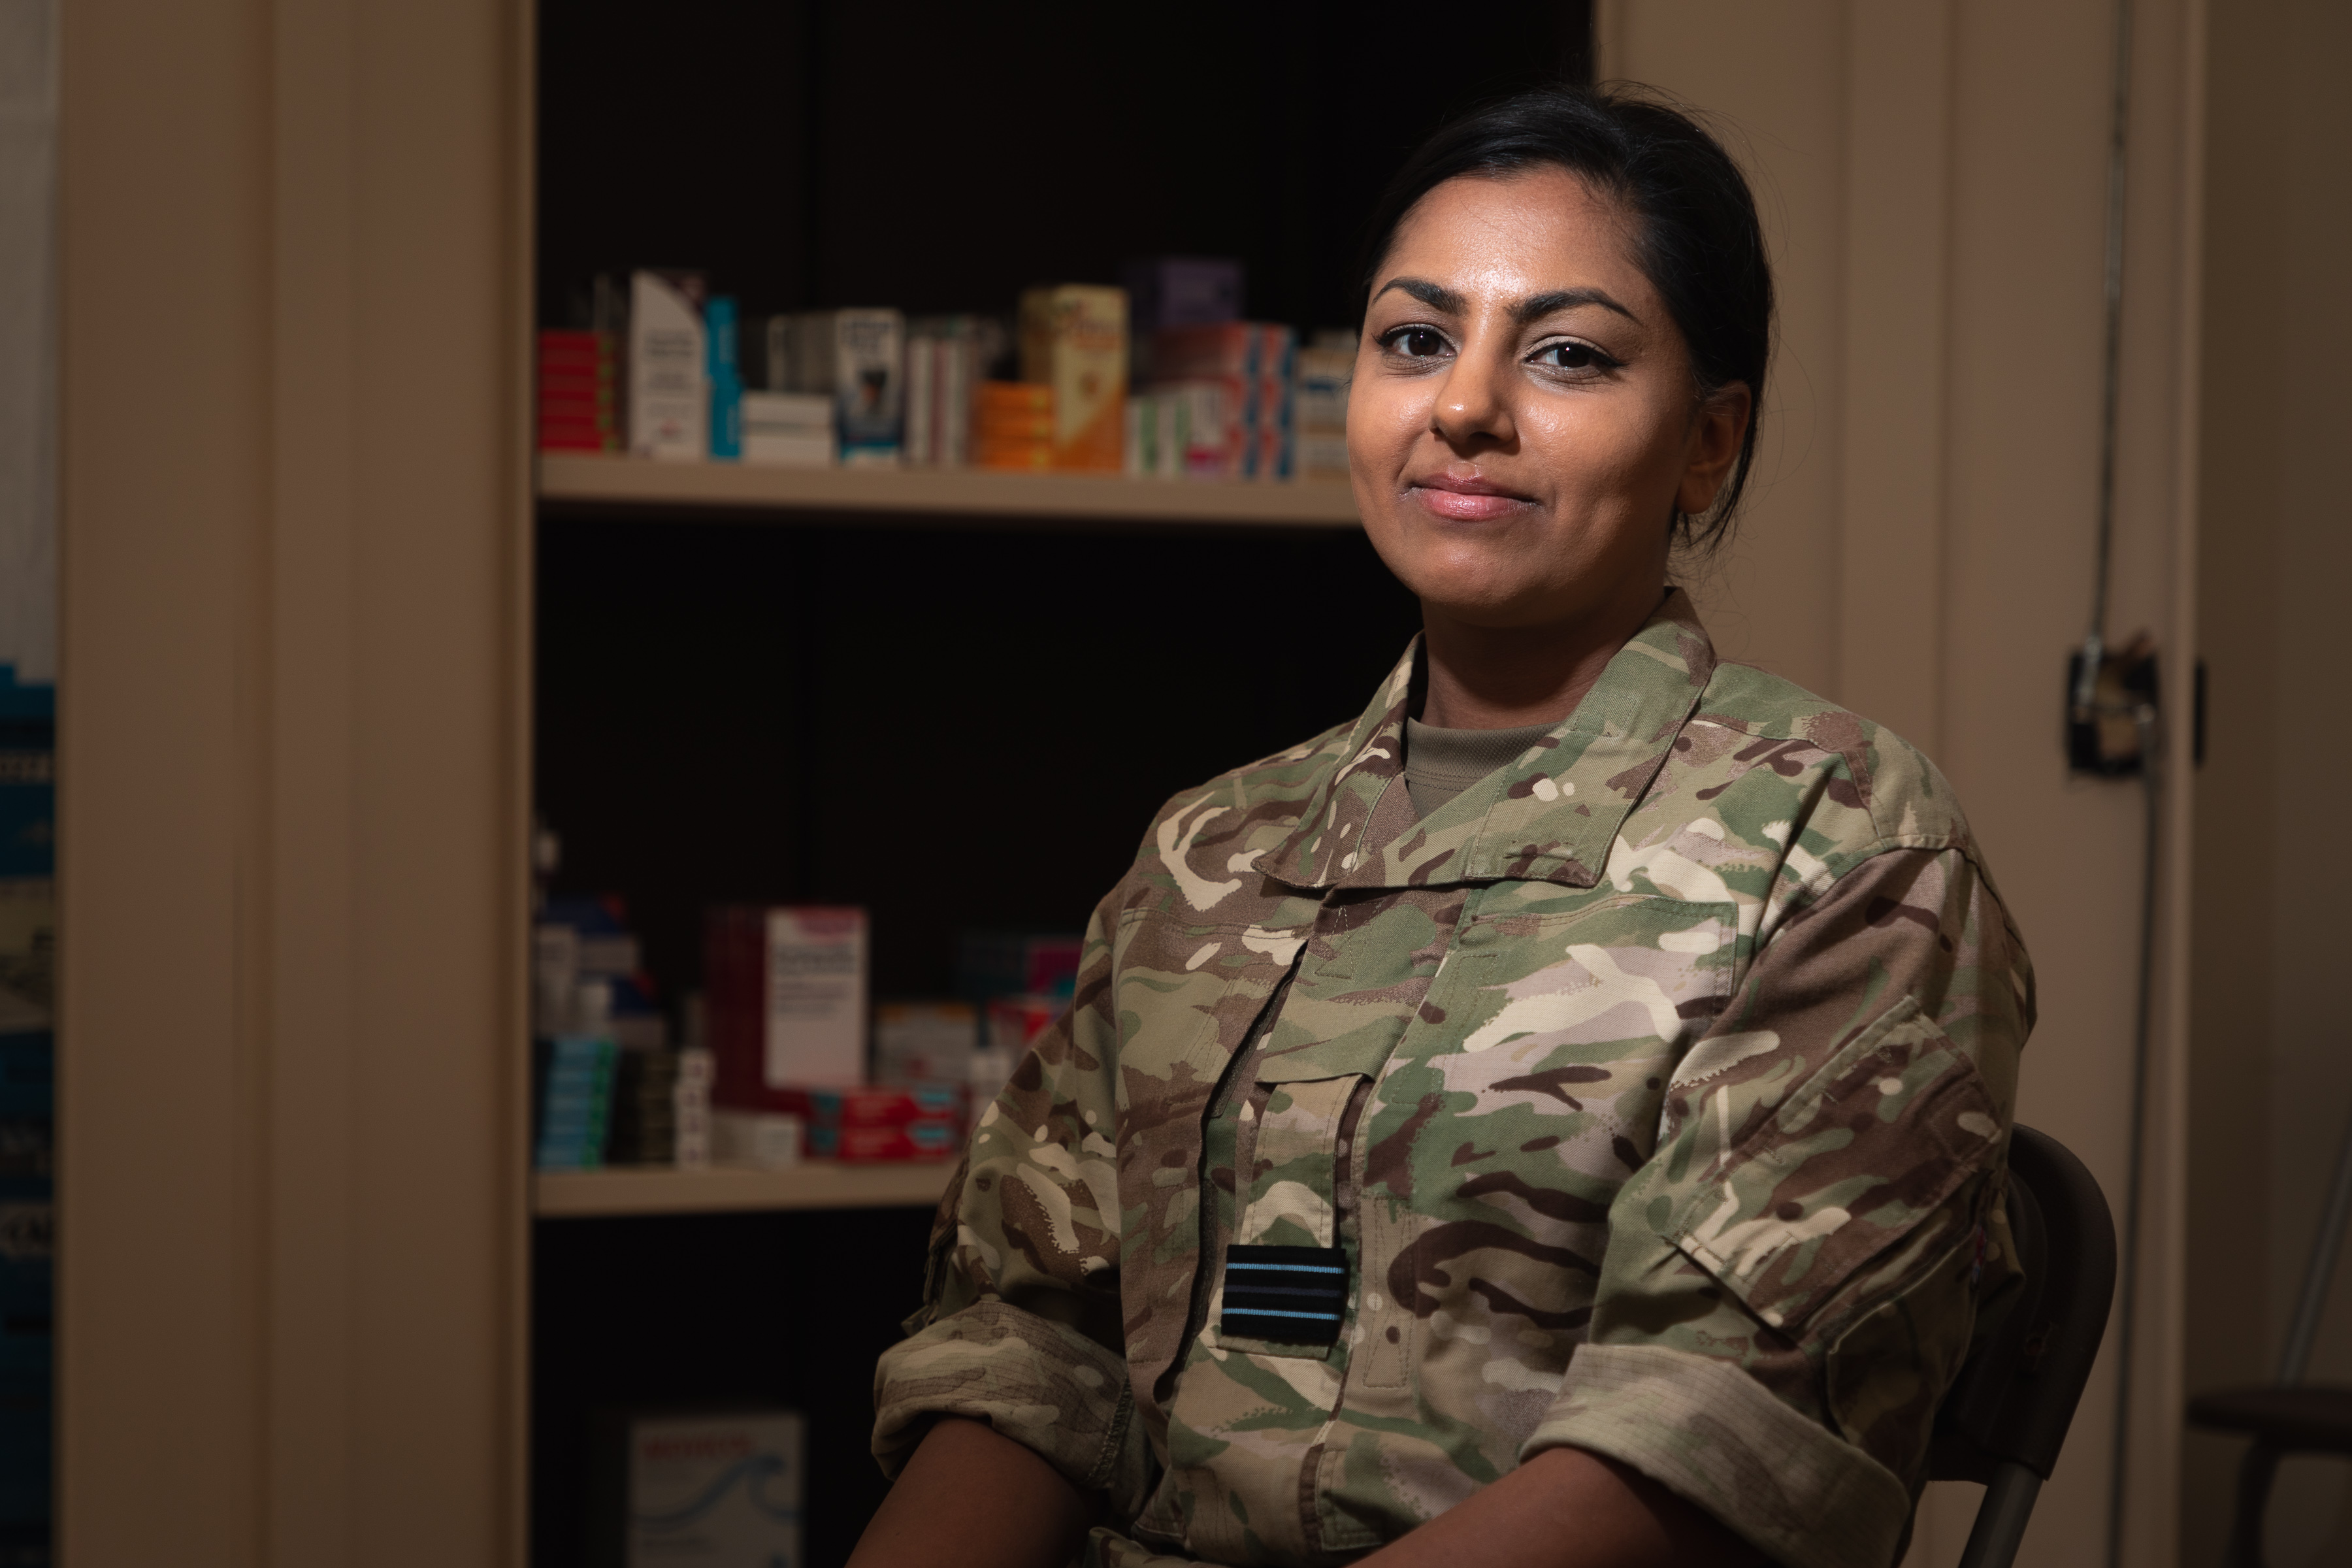 Image shows RAF aviator sitting in front of a pharmacy medicine cabinet.